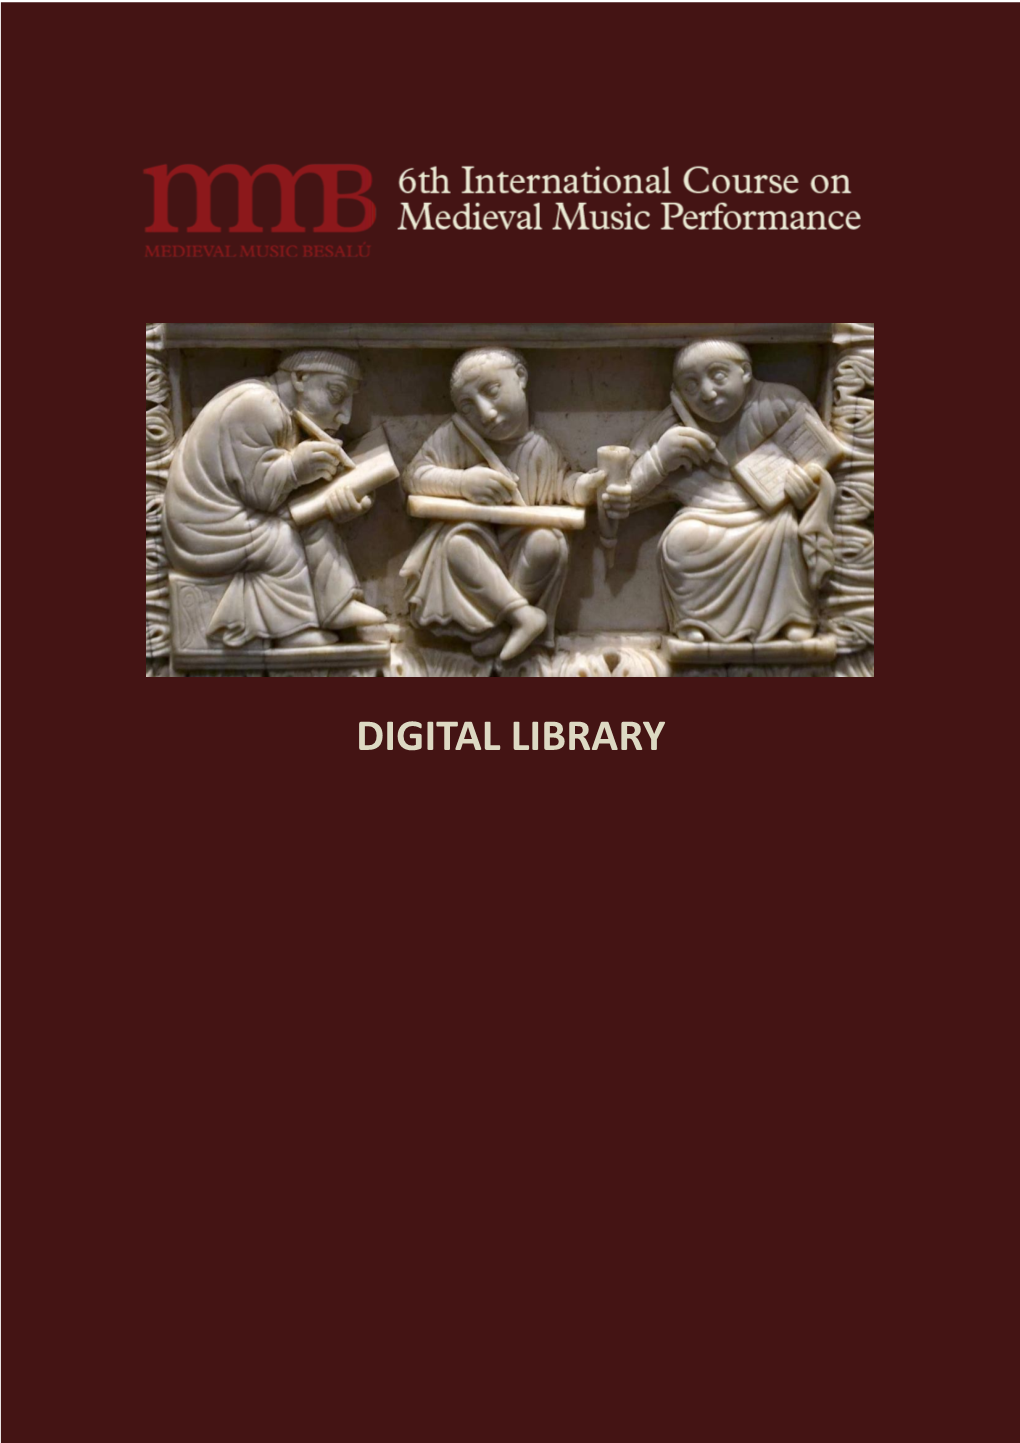 Digital Library List of Online Sources